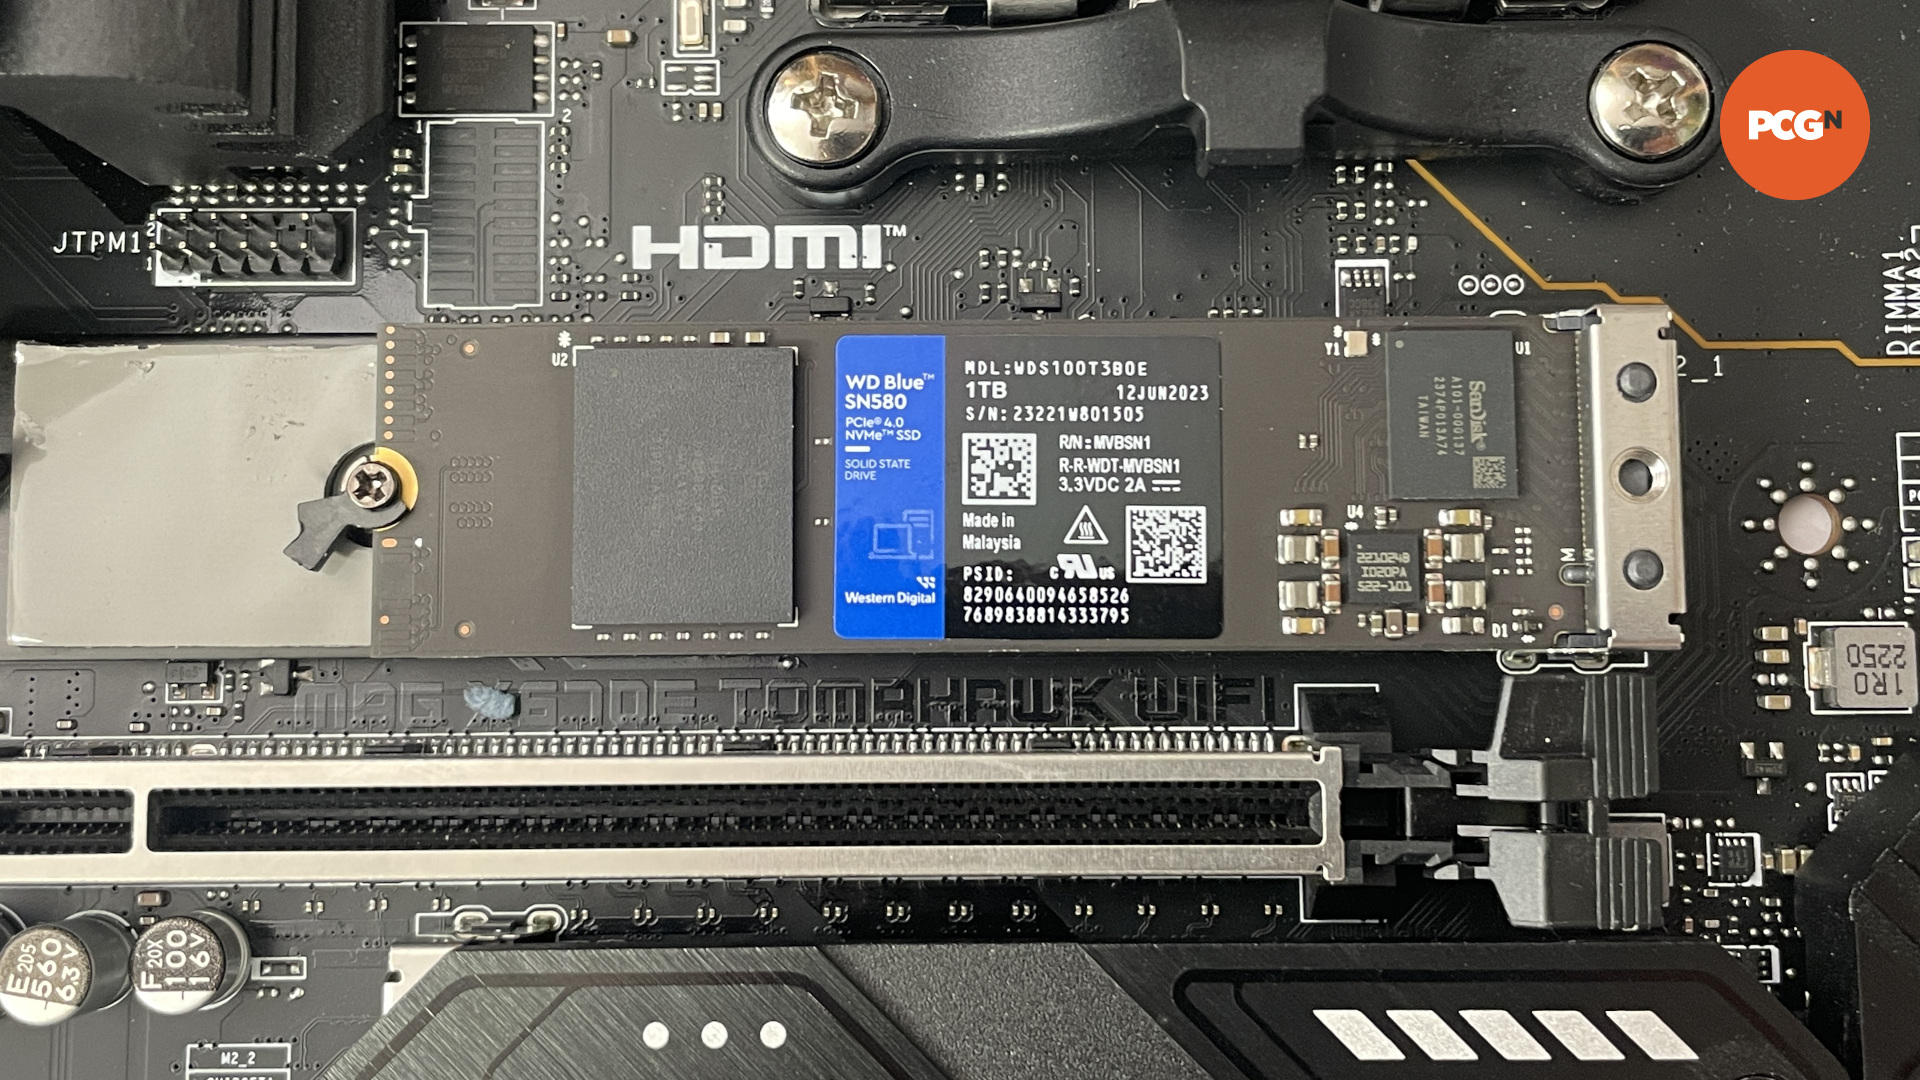 The SN580 SSD seated in the NVME slot in the motherboard